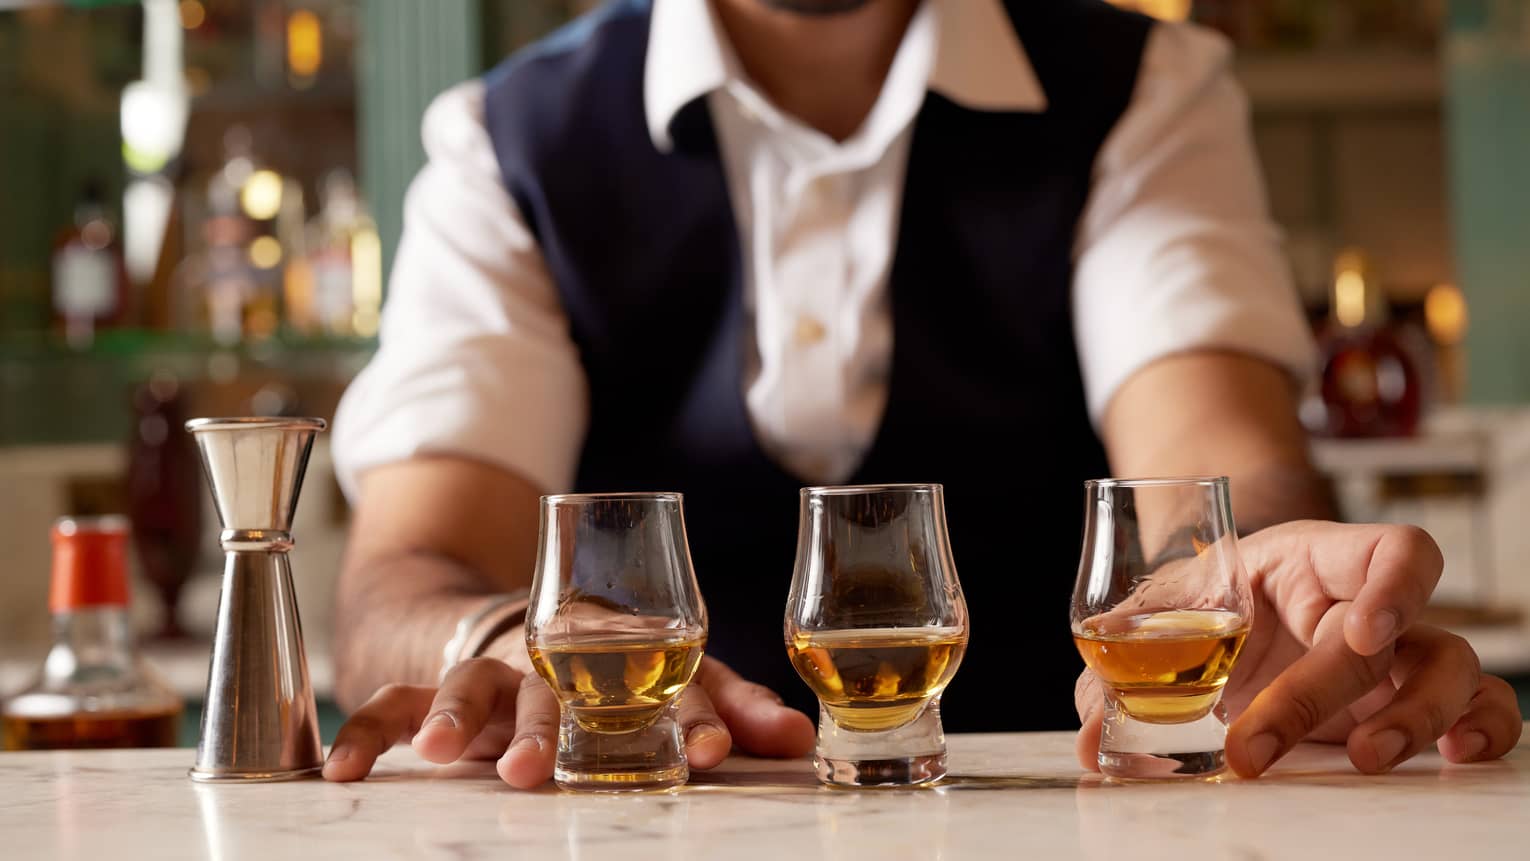 Bartender serving up three snifters halfway full of whisky